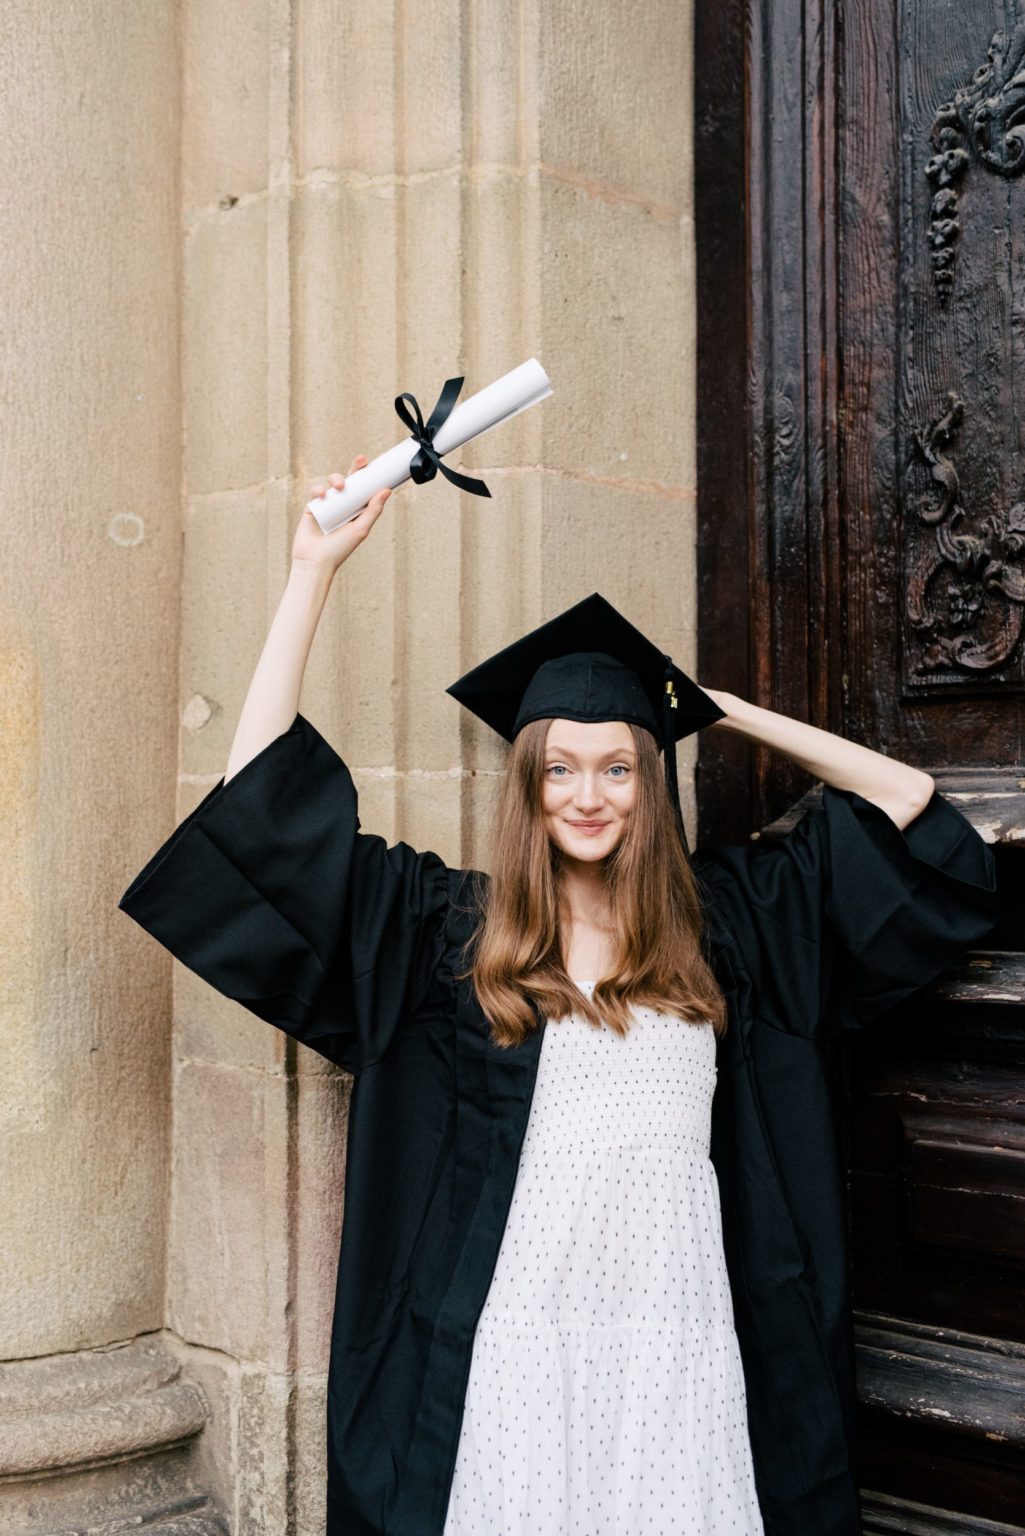 a person in a graduation gown and gown holding a diploma